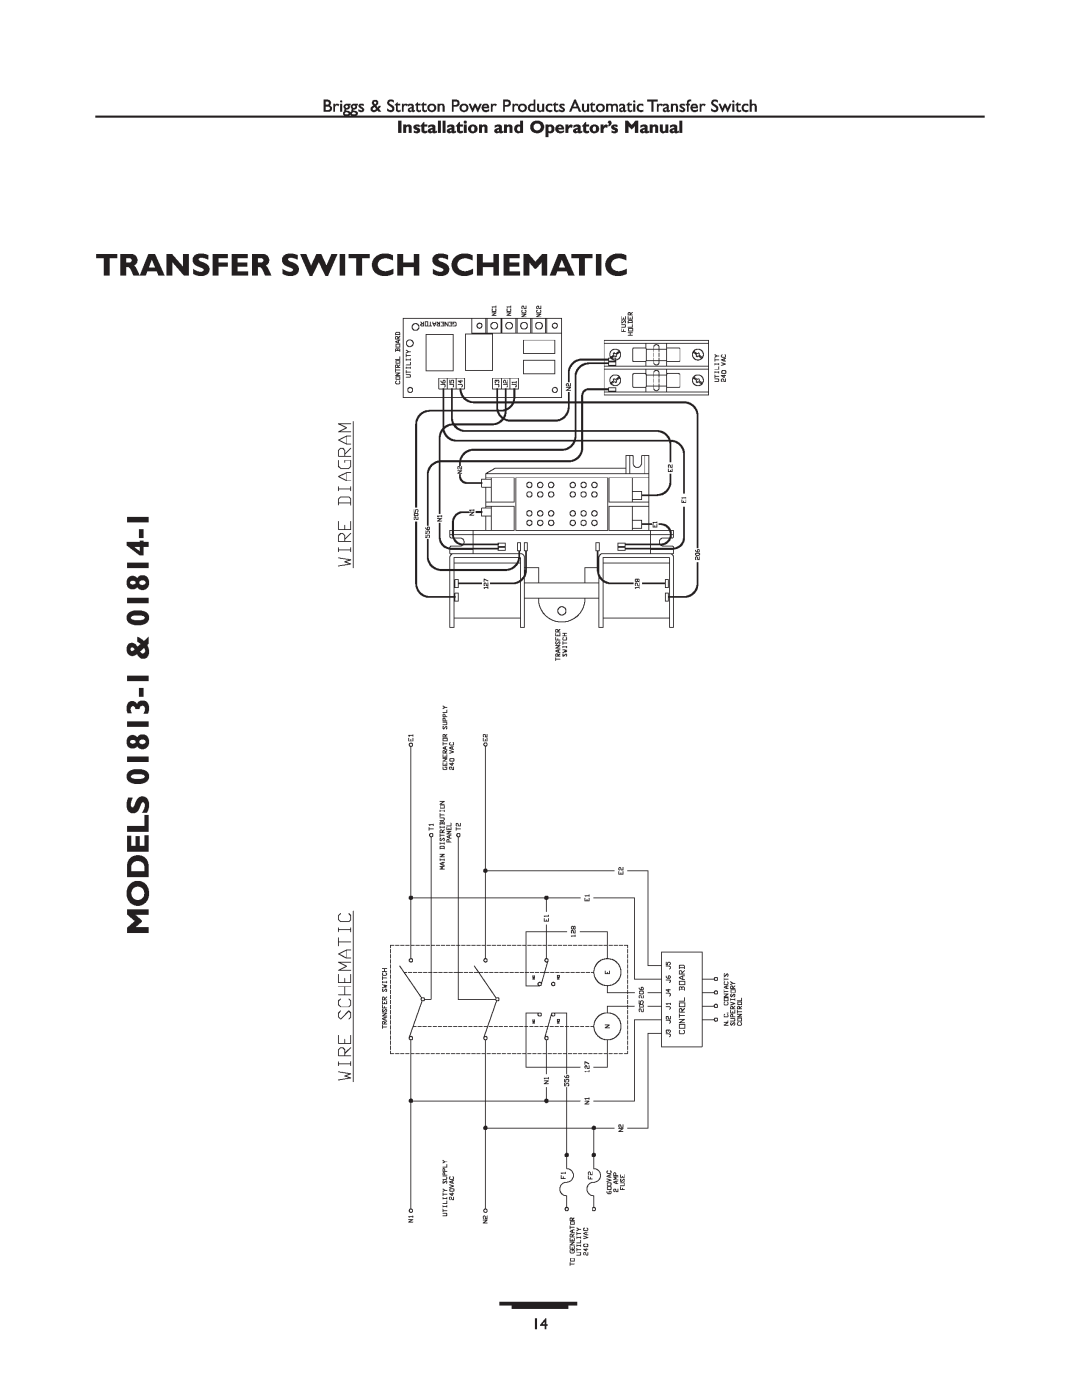 Briggs & Stratton 01929-1, 01928-1, 01814-1 TRANSFER SWITCH SCHEMATIC MODELS 01813-1, Installation and Operator’s Manual 